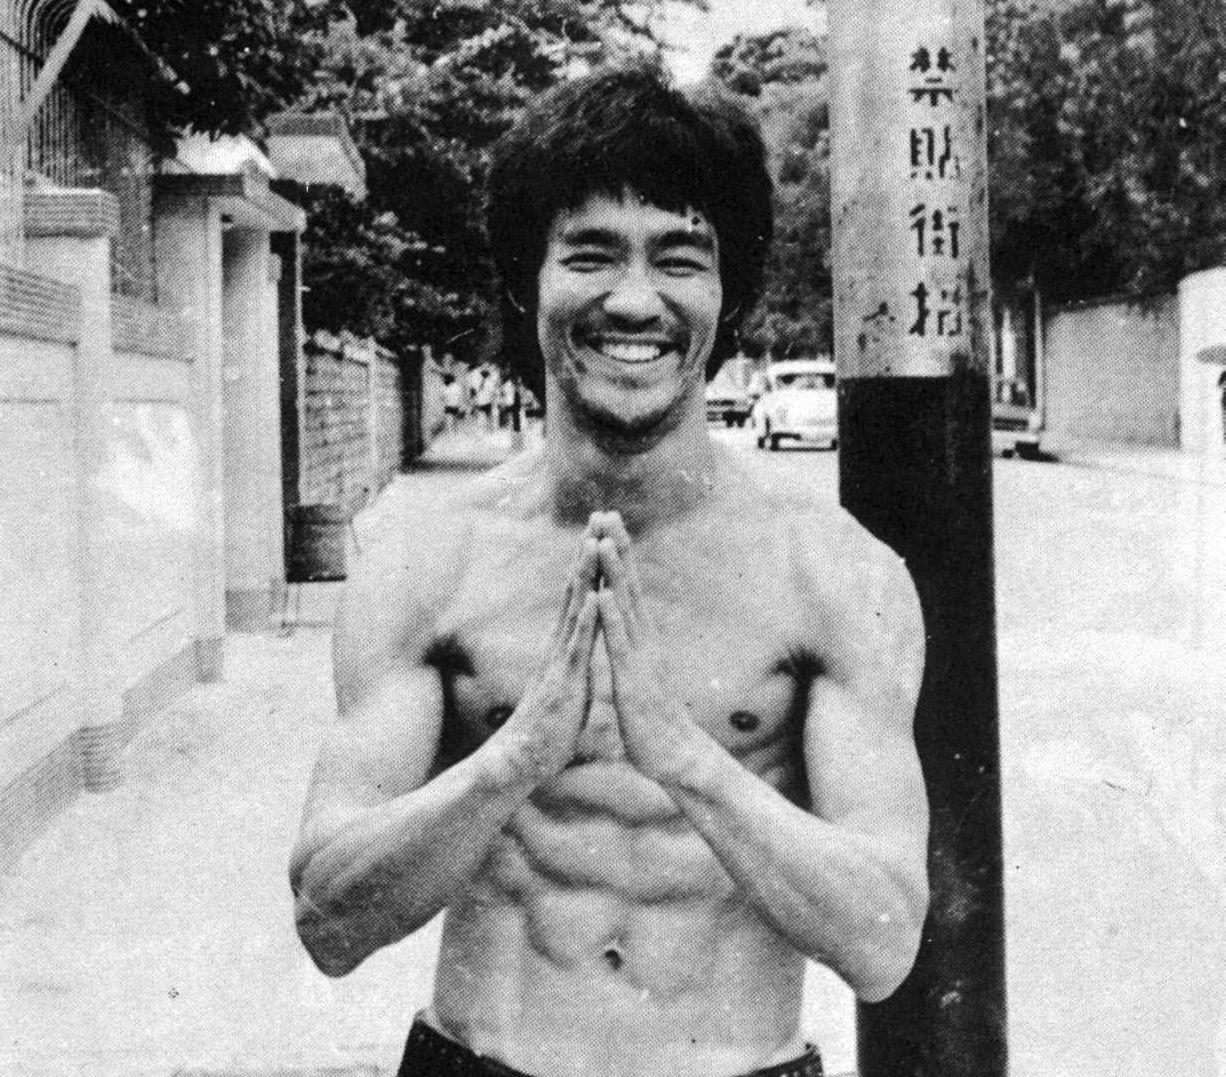 Bruce Lee Trivia, History, and Facts You Didn't Know About